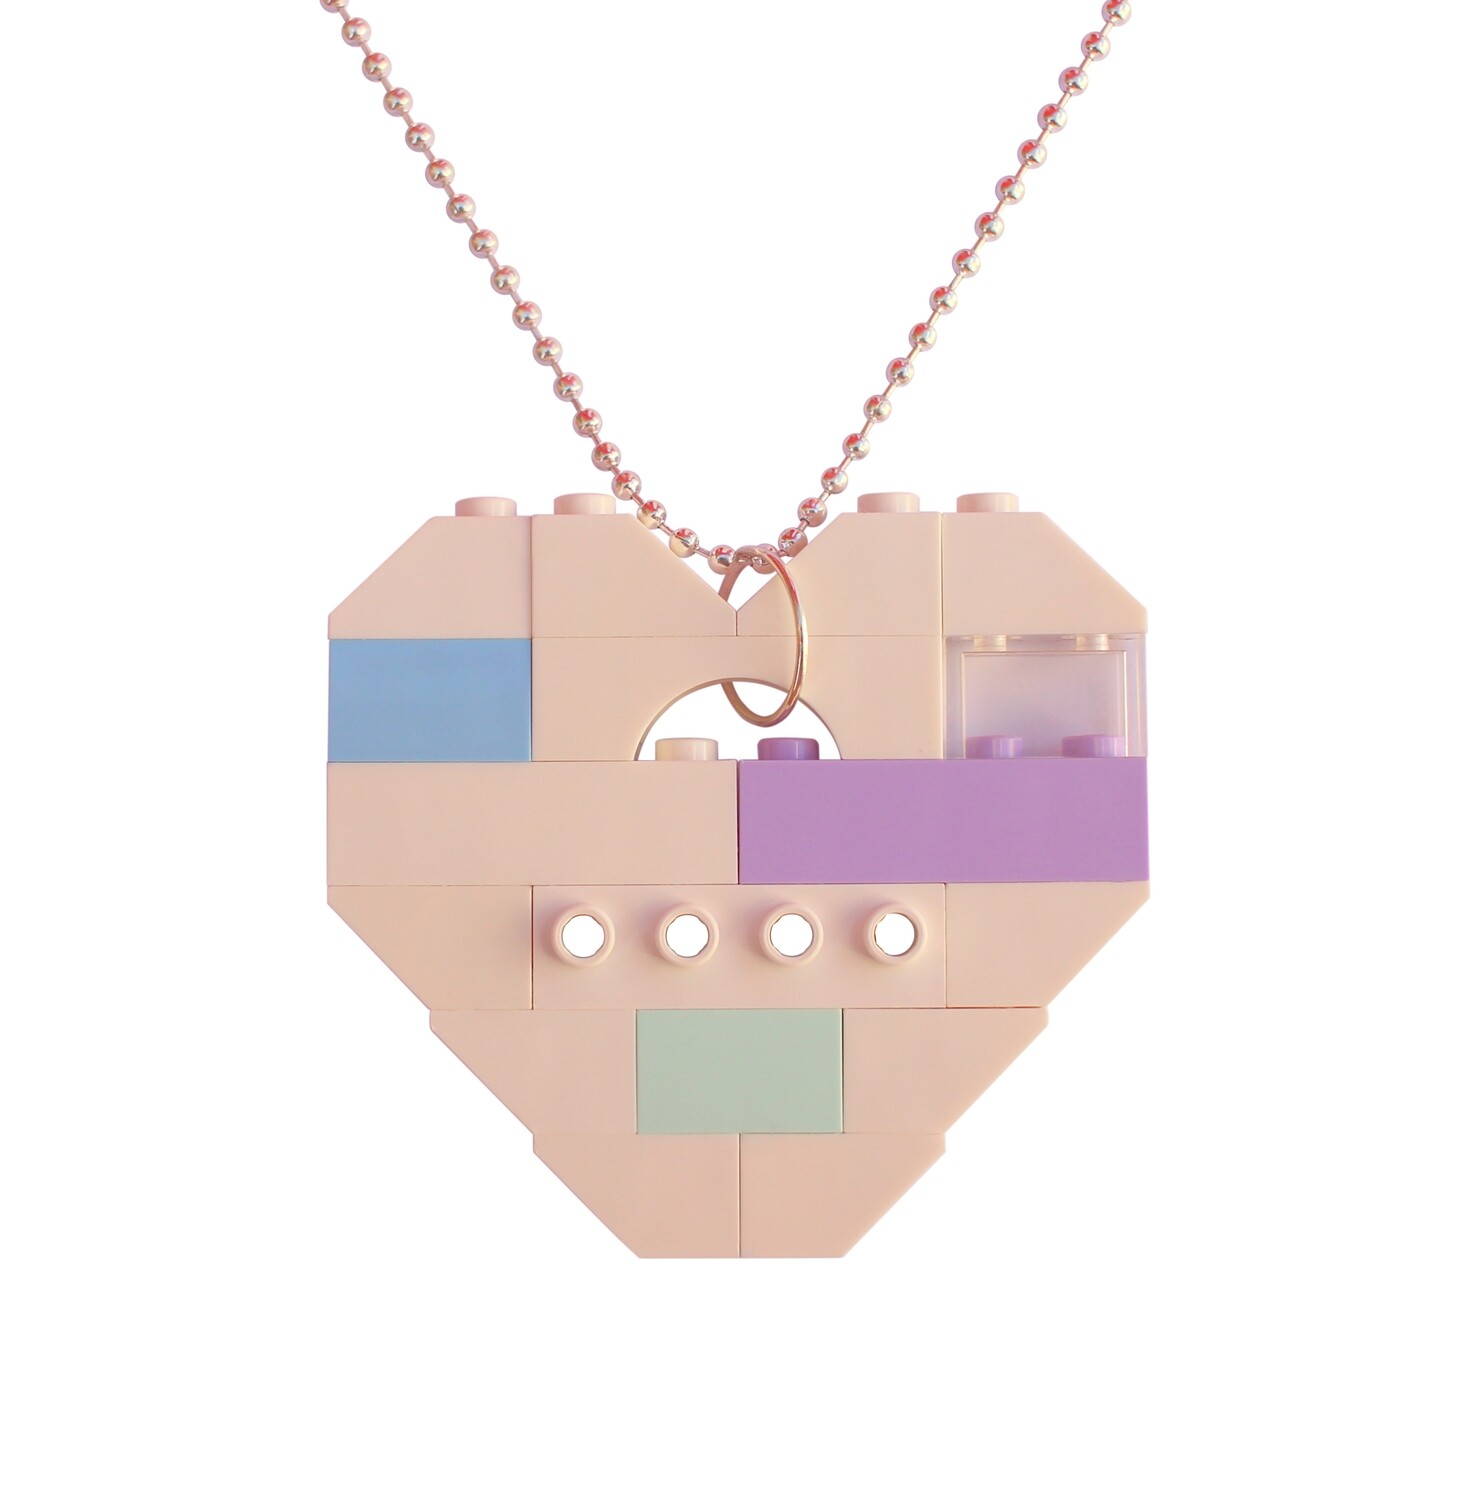 ​Collectible heart pendant (Single thickness) Model 17 - made from LEGO® bricks on a 24" Silver plated ballchain - KAWAII PASTEL